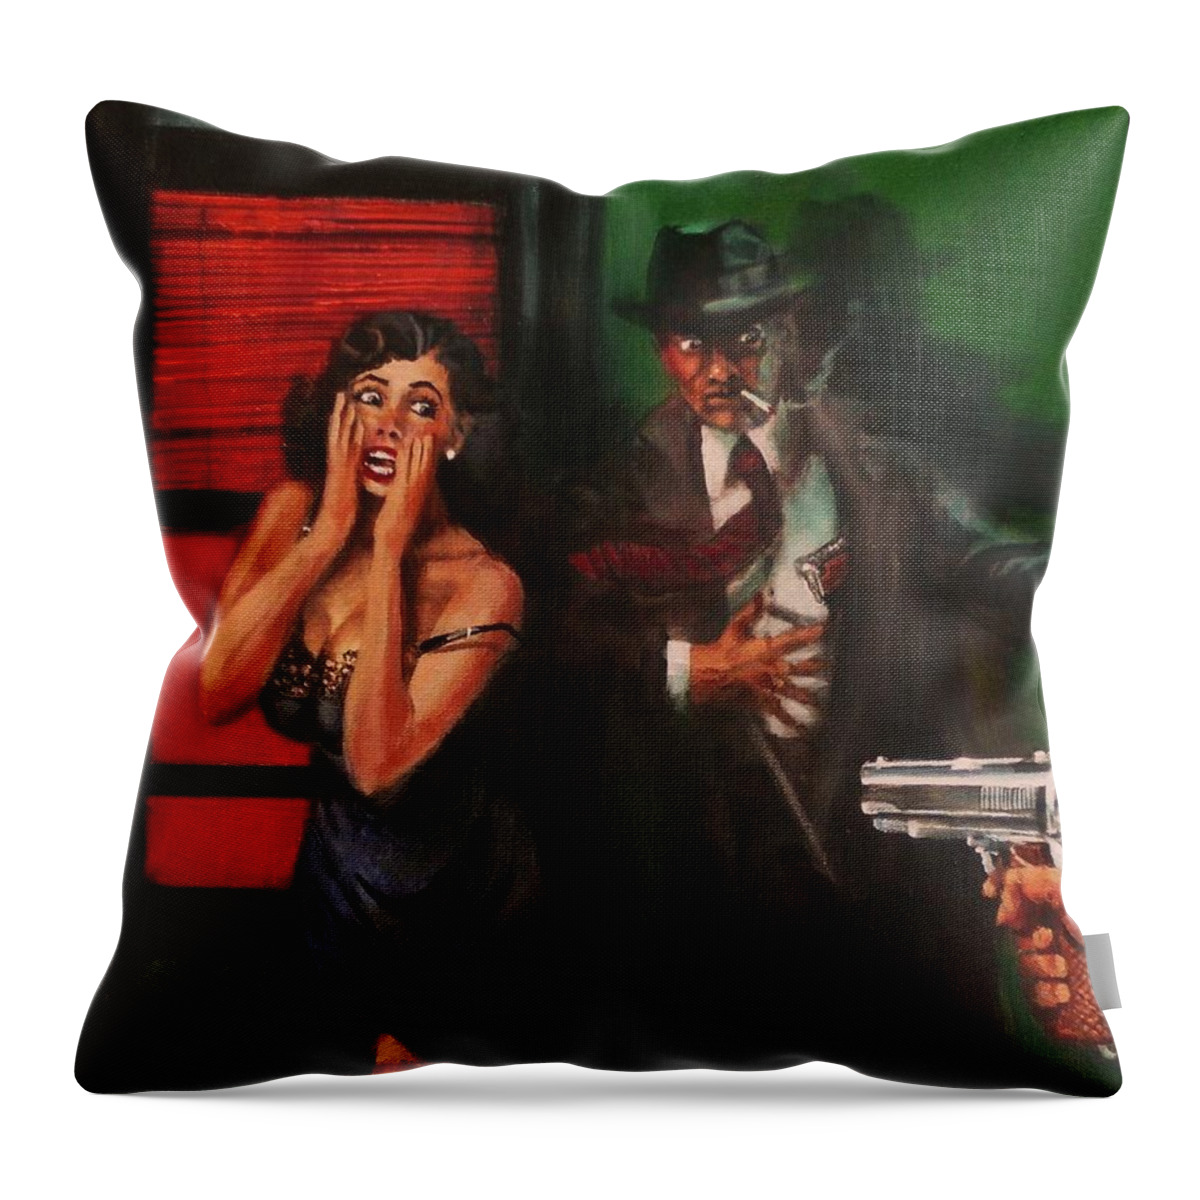  Art Noir Throw Pillow featuring the painting Deadly Surprise by Tom Shropshire